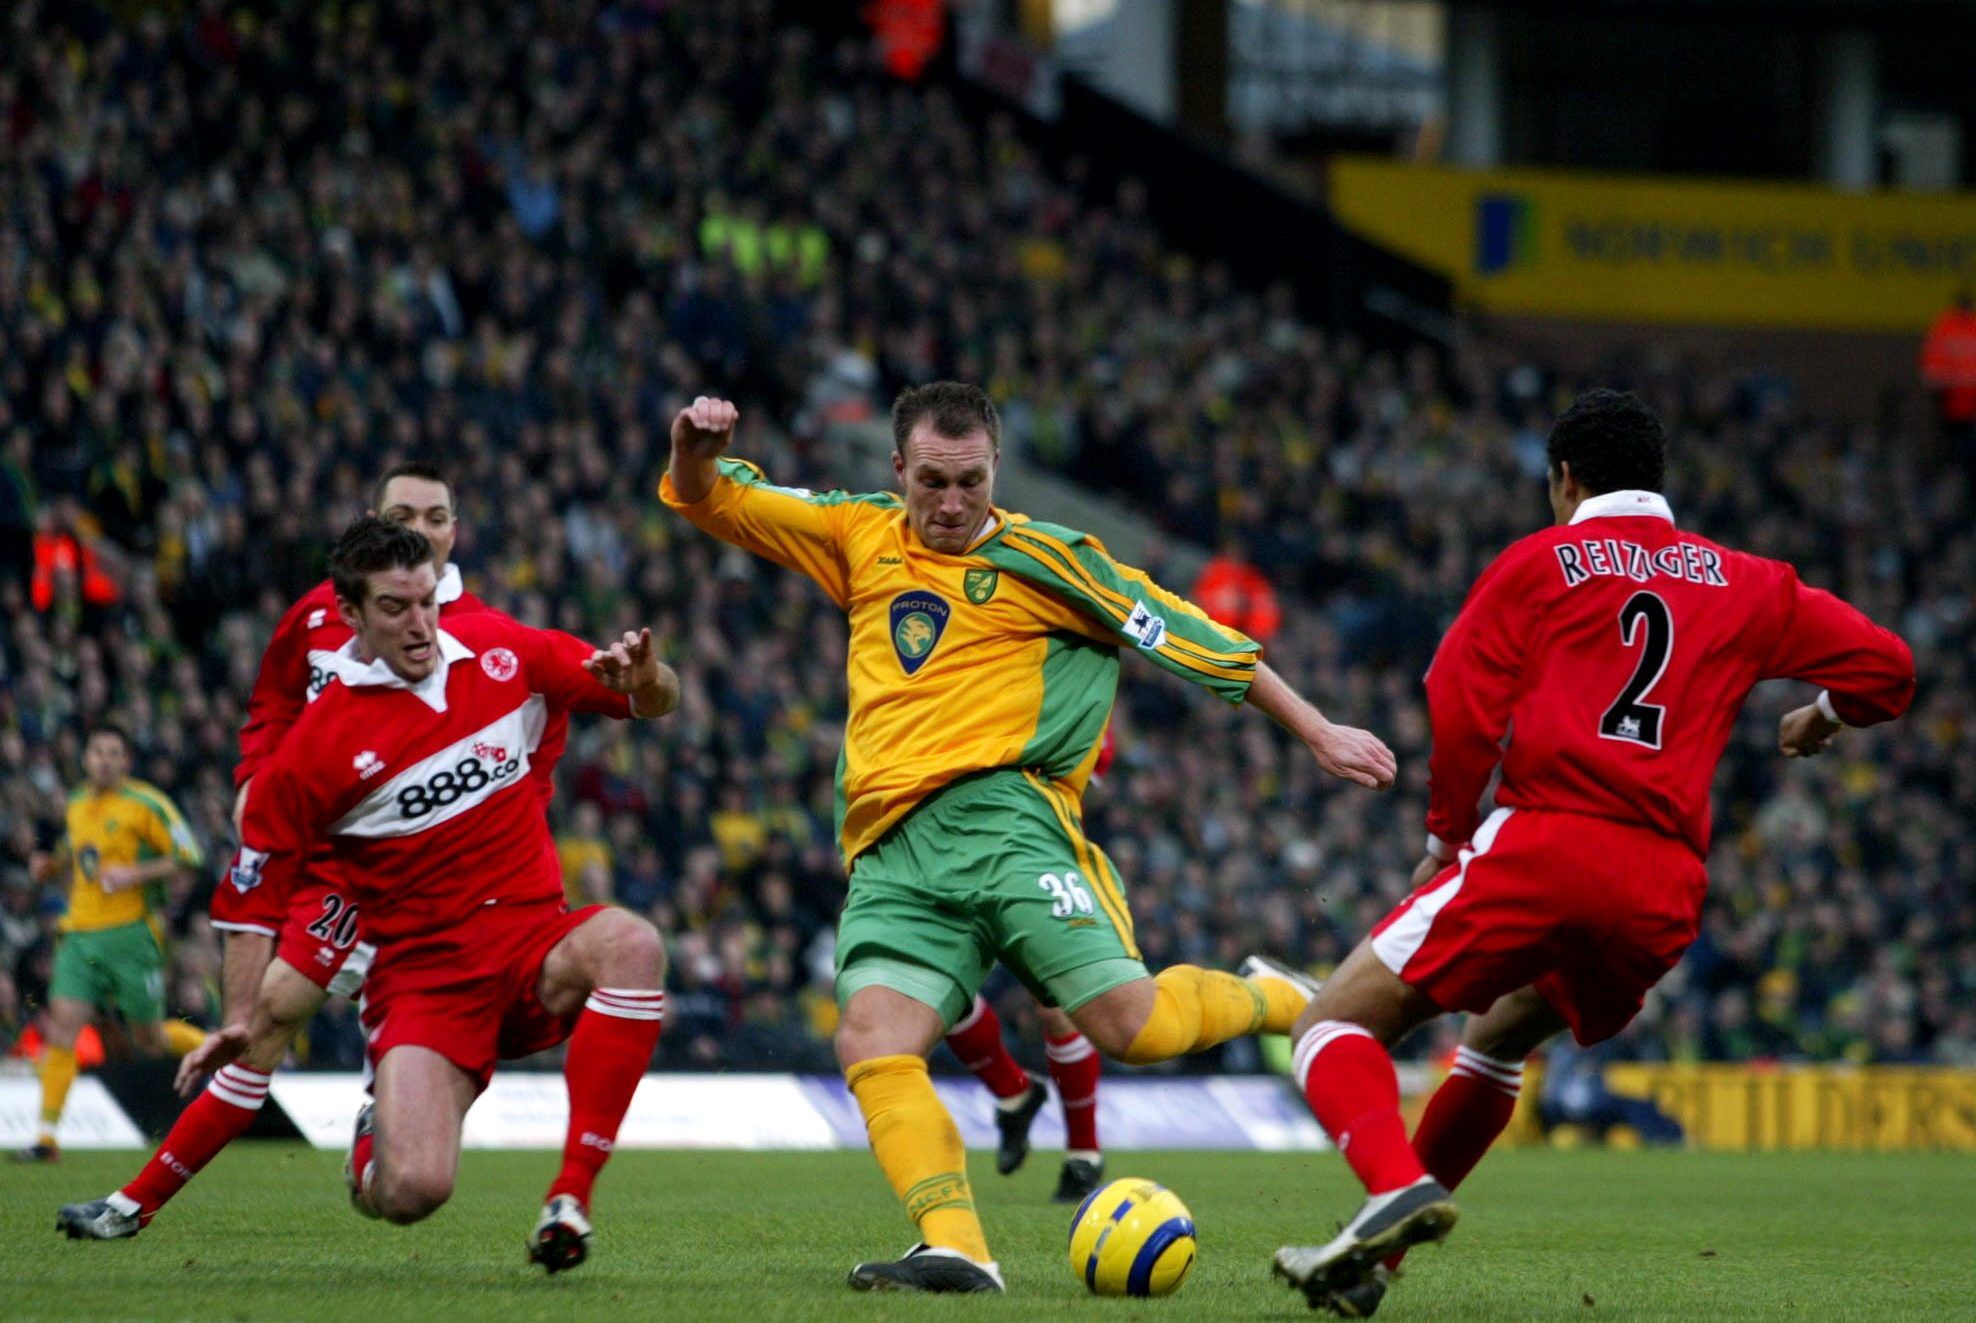 Football - Norwich City v Middlesbrough - FA Barclays Premiership - Carrow Road - 04/05 , 22/1/05 
Dean Ashton - Norwich City in action against Middlesbrough 
Mandatory Credit: Action Images / Jason O'Brien 
NO ONLINE/INTERNET USE WITHOUT A LICENCE FROM THE FOOTBALL DATA CO LTD. FOR LICENCE ENQUIRIES PLEASE TELEPHONE +44 207 298 1656.